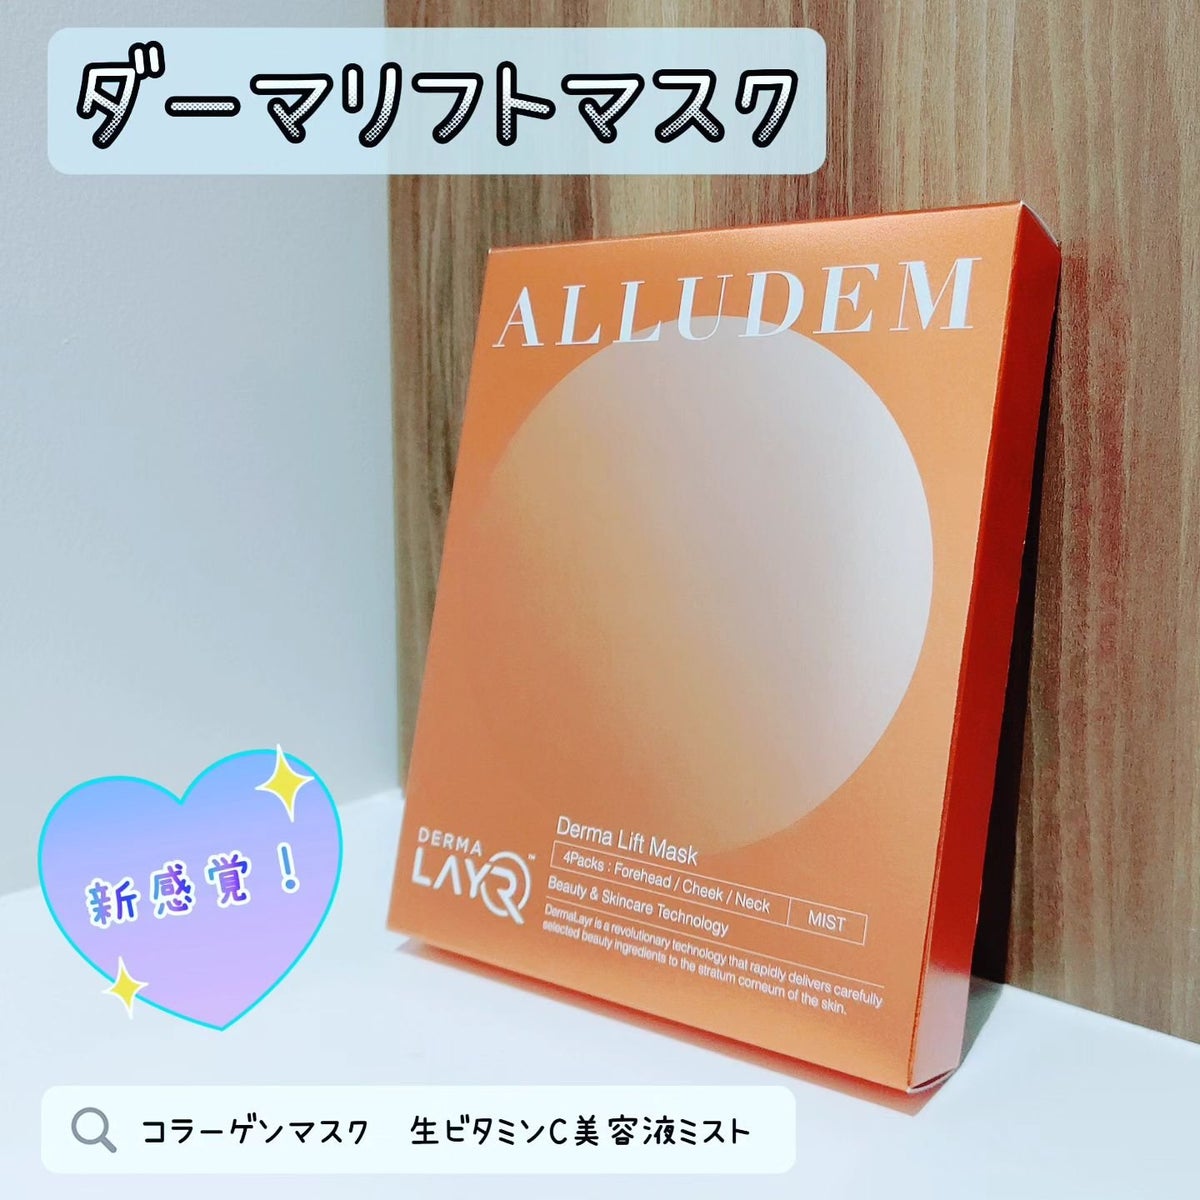 ALLUDEM Derma Lift Mask - 洗顔グッズ